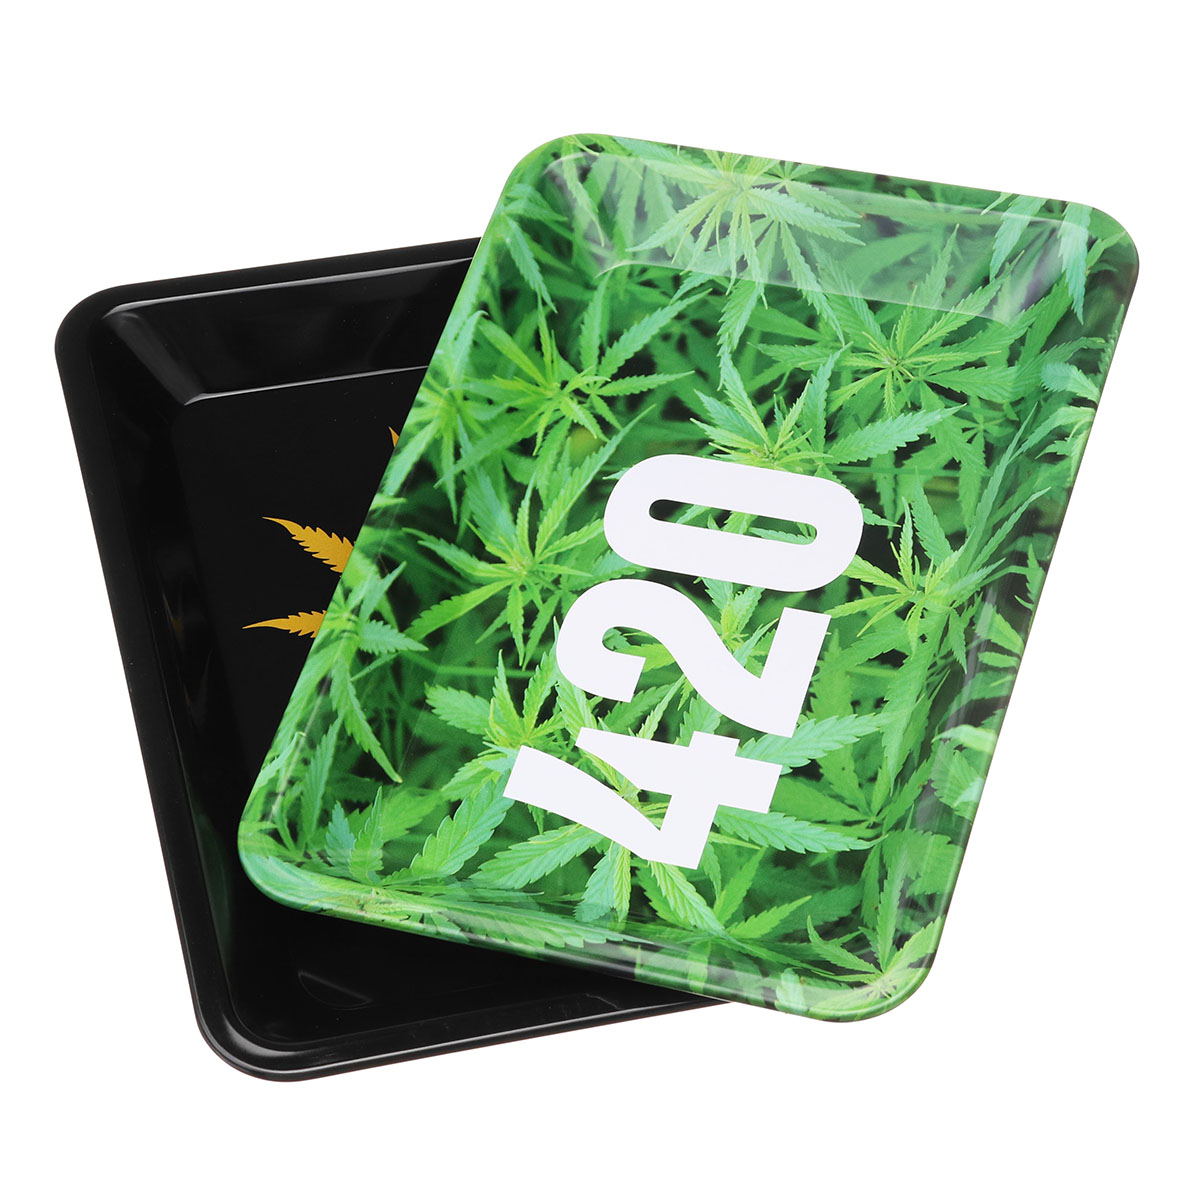 

18cm*12.5cm Portable Metal Rolling Tray Smoking Cigarettes Holder Trays Decorations